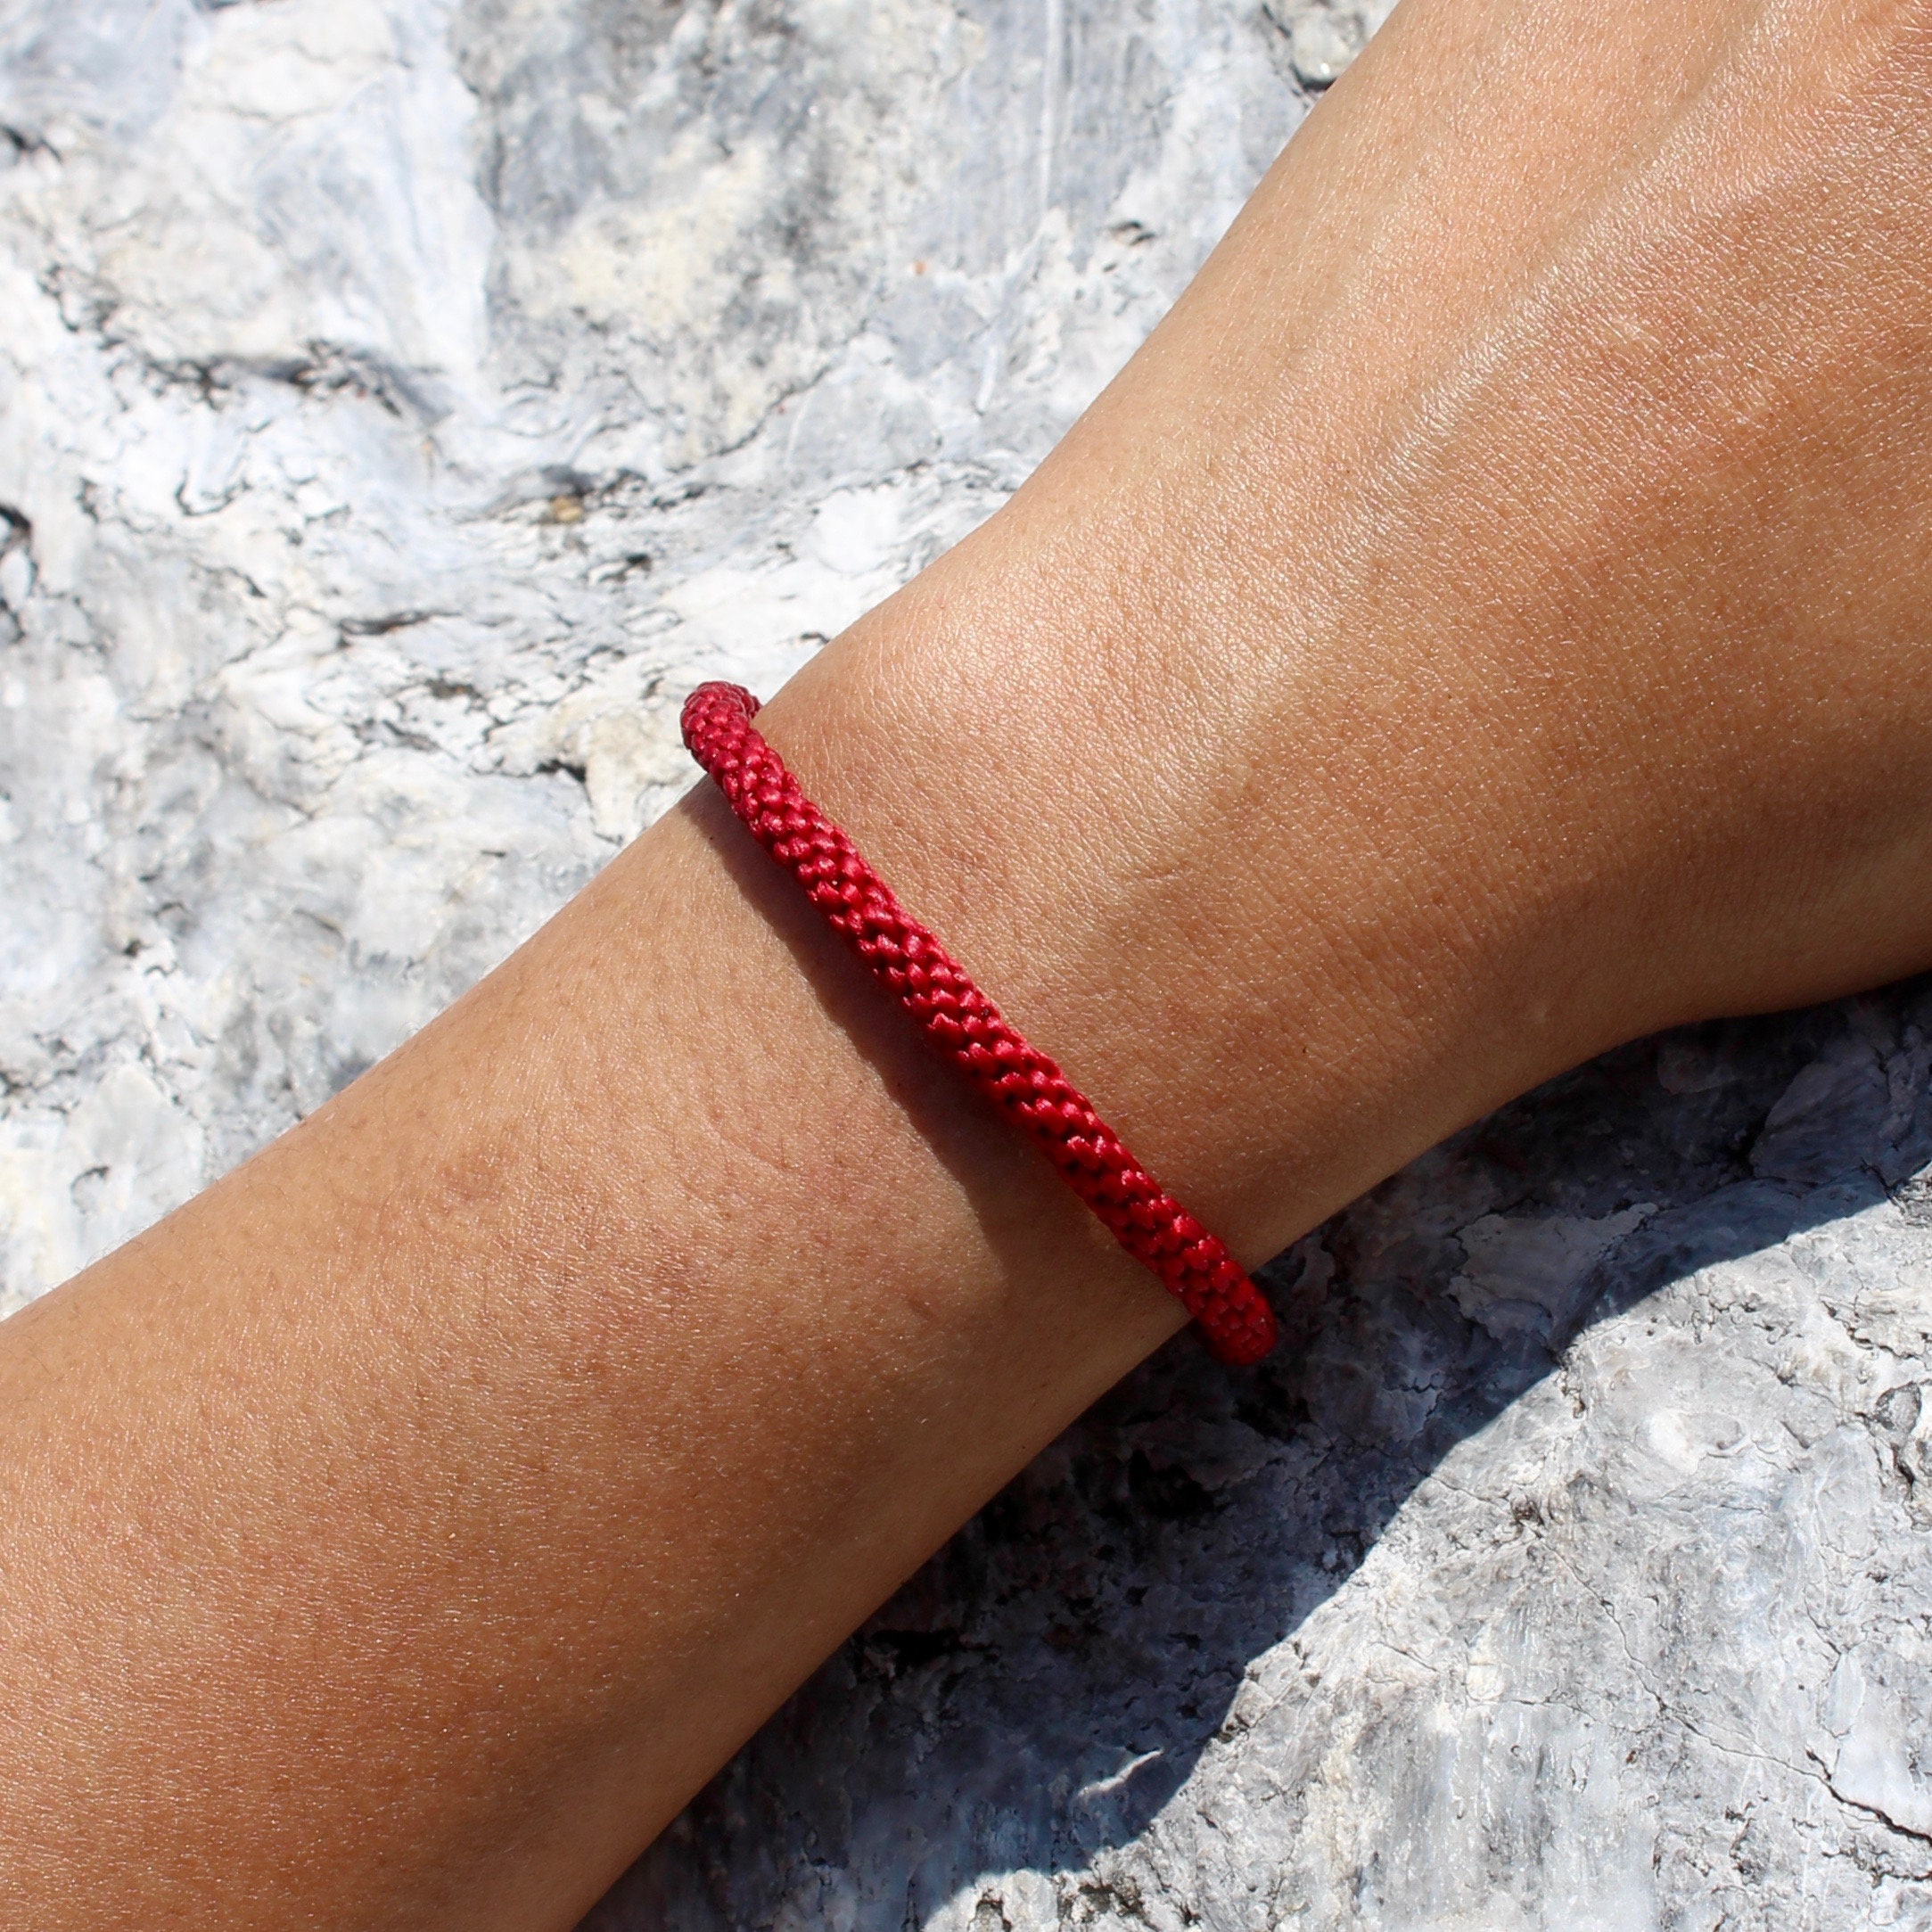 Buy Red Lucky Bracelet, Braid Bracelet, Red String Bracelet, Buddhist  Bracelet, Tibetan Buddhist Bracelet, Adjustable Protection Amulet,red Cord  Online in India - Etsy